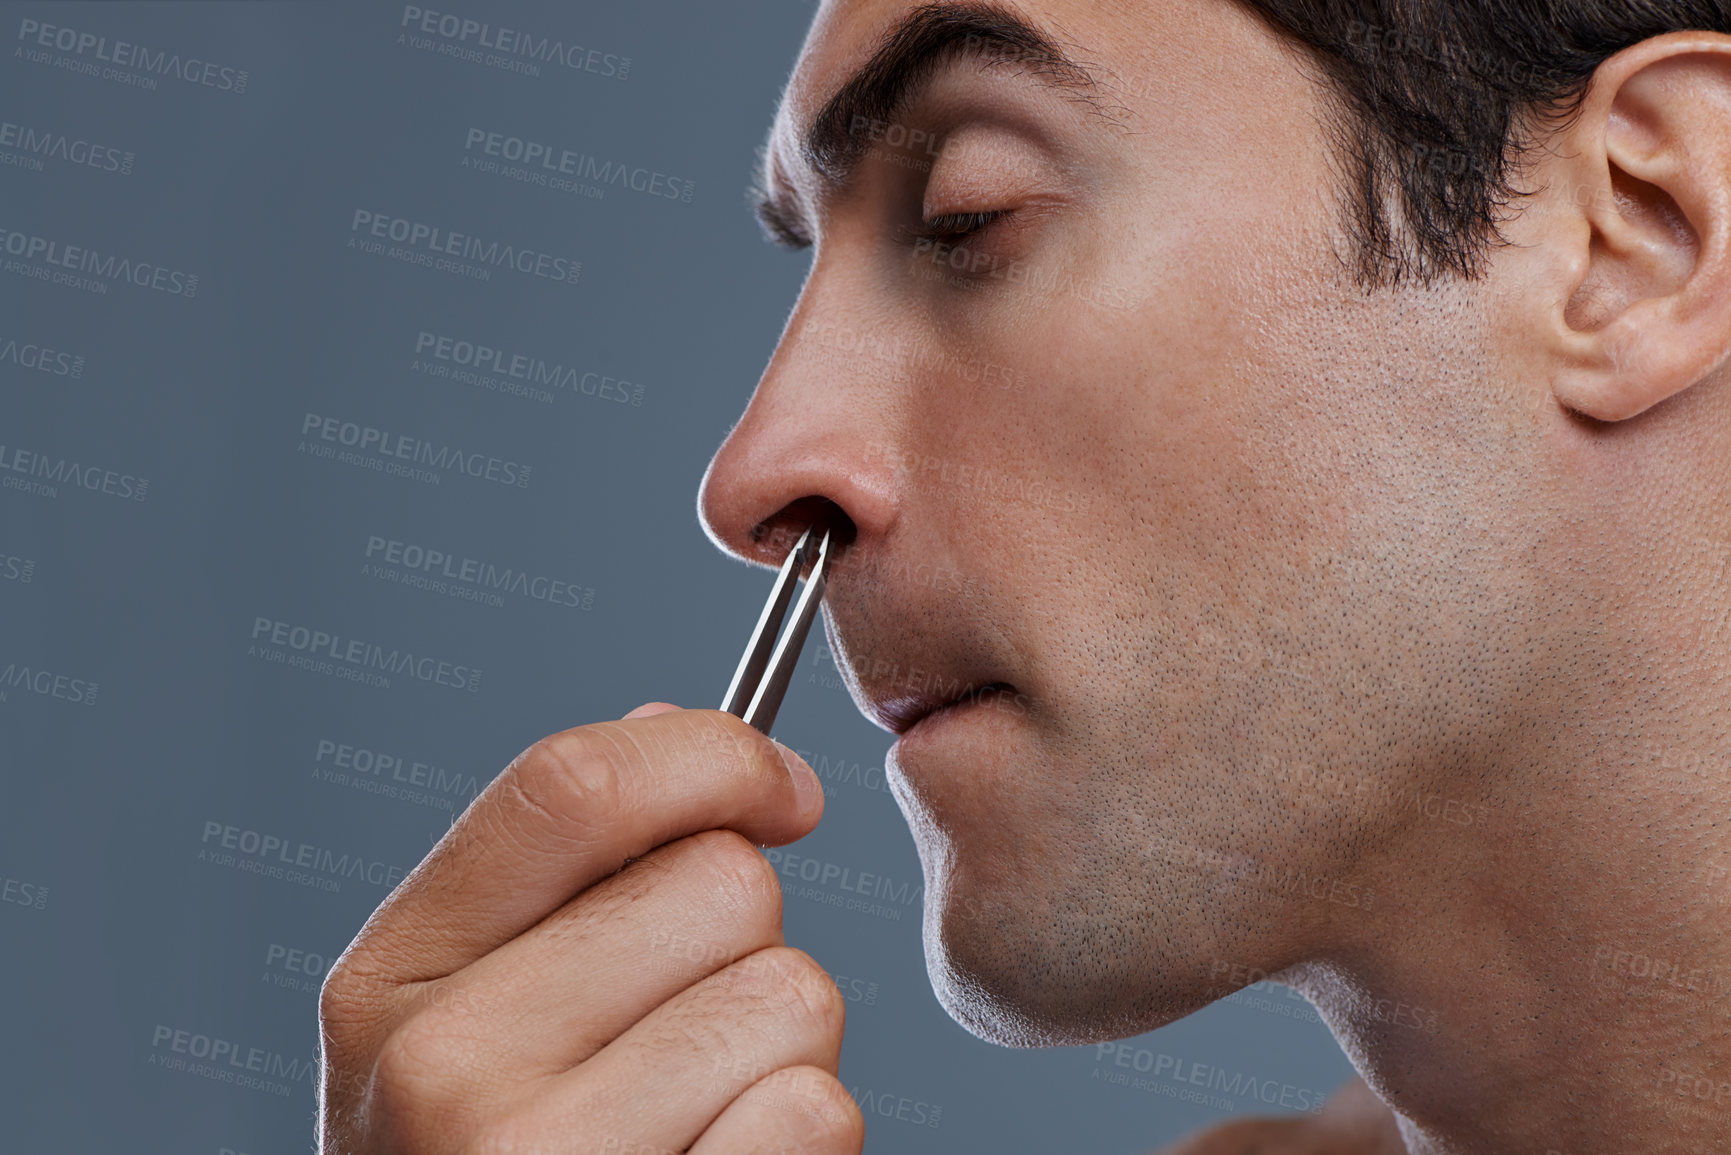 Buy stock photo Nose hair, cleaning and man with tweezers and pain from plucking in studio background or mockup. Beauty, epilation and person with facial grooming routine and treatment for self care with tools